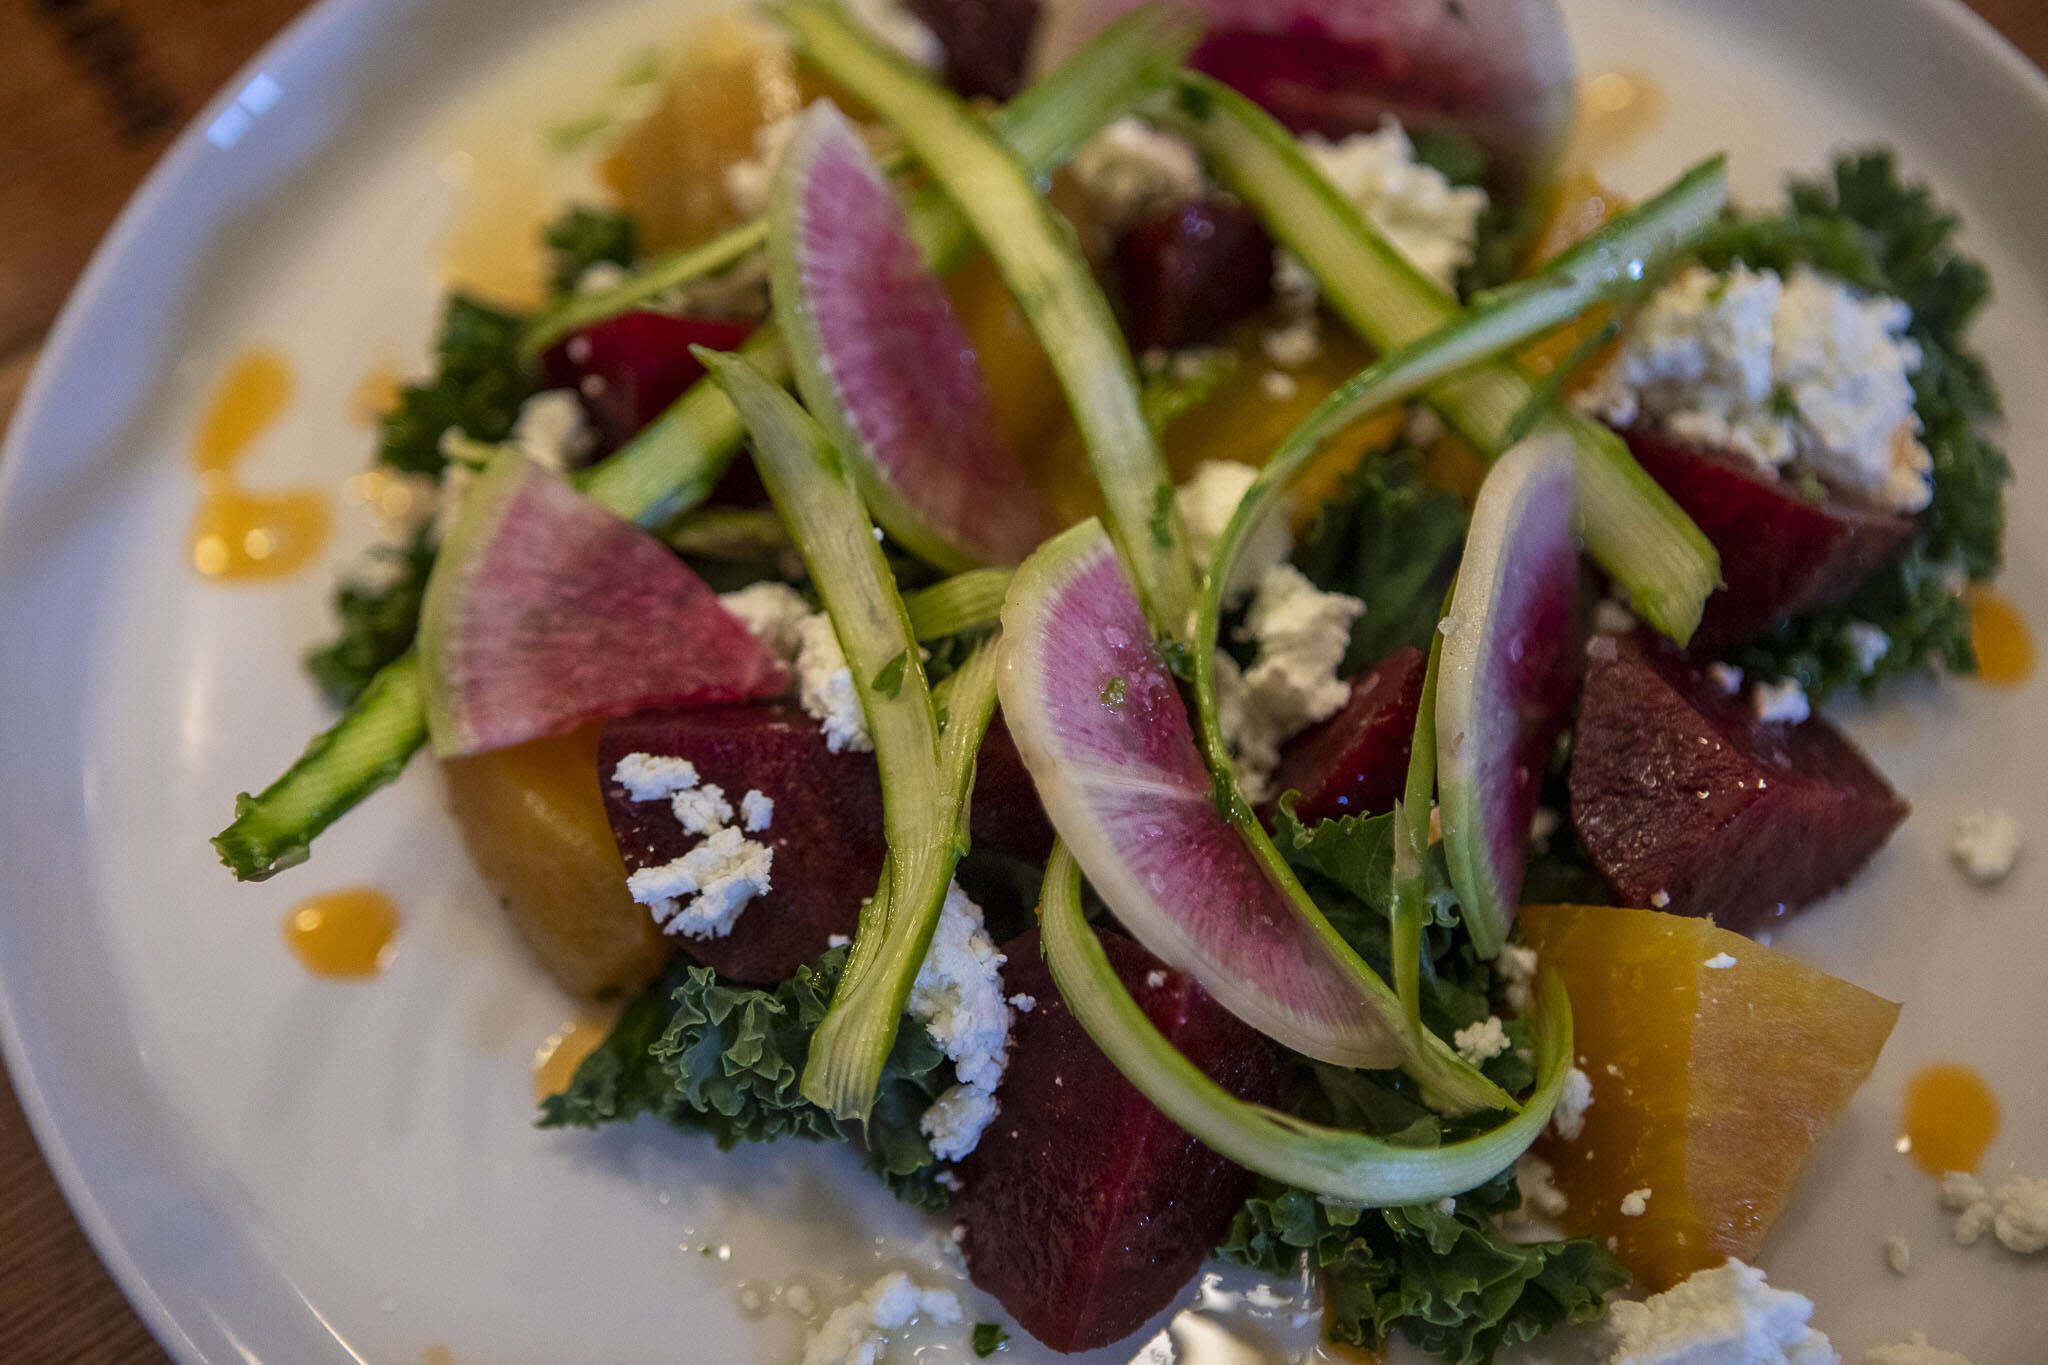 The country farm salad with beet root, asparagus, radish, goat cheese and citrus vinaigrette at the Bush House Inn in Index, Washington on Monday, June 26, 2023. (Annie Barker / The Herald)